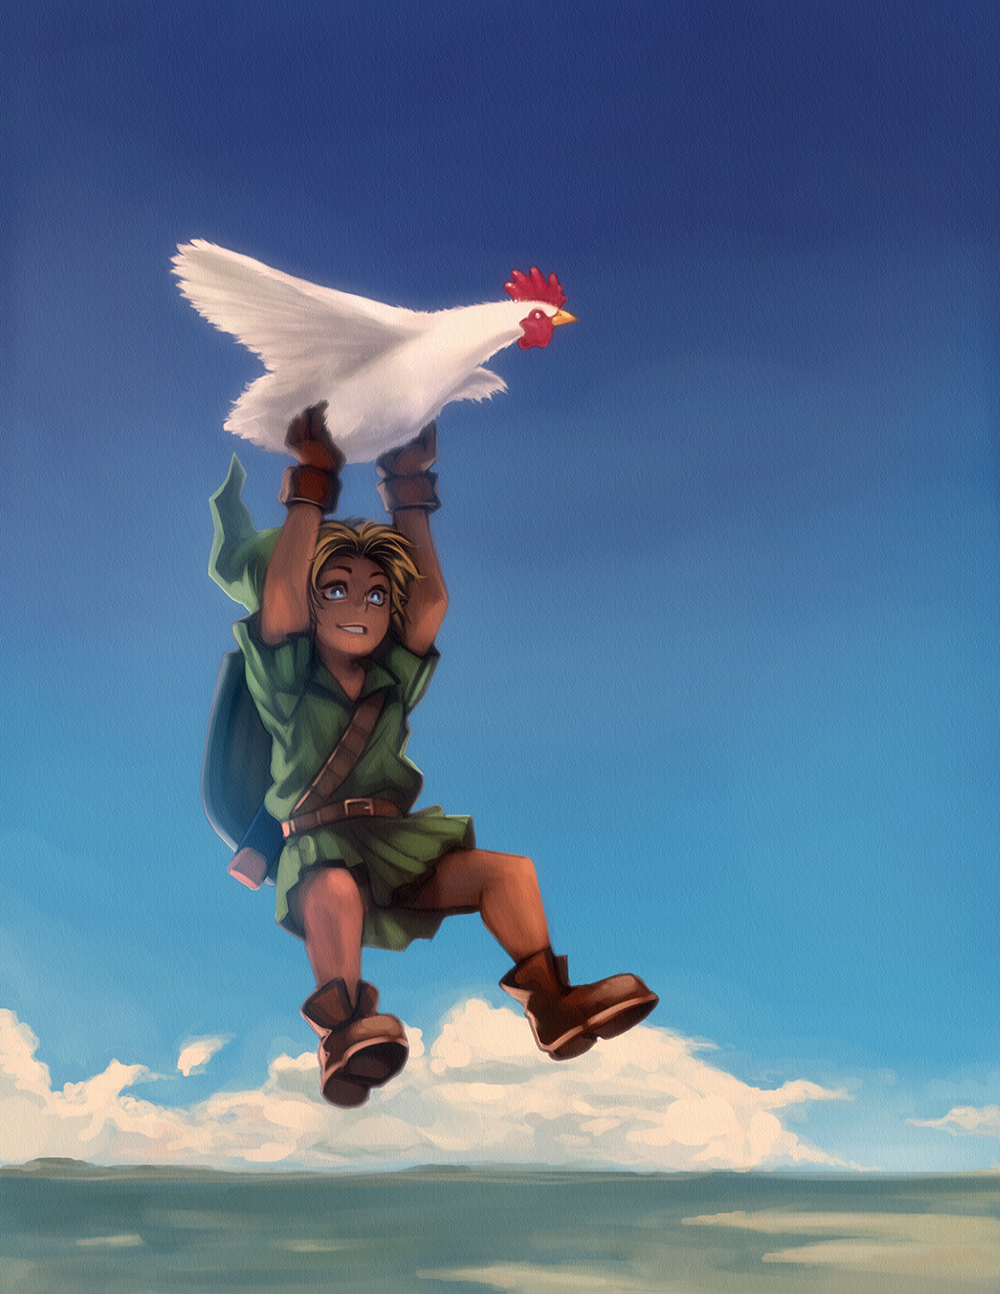 __link_young_link_and_cucco_the_legend_of_zelda_and_1_more_drawn_by_voodoothur__f07219720a8019f9247beb80ab4d0111.png